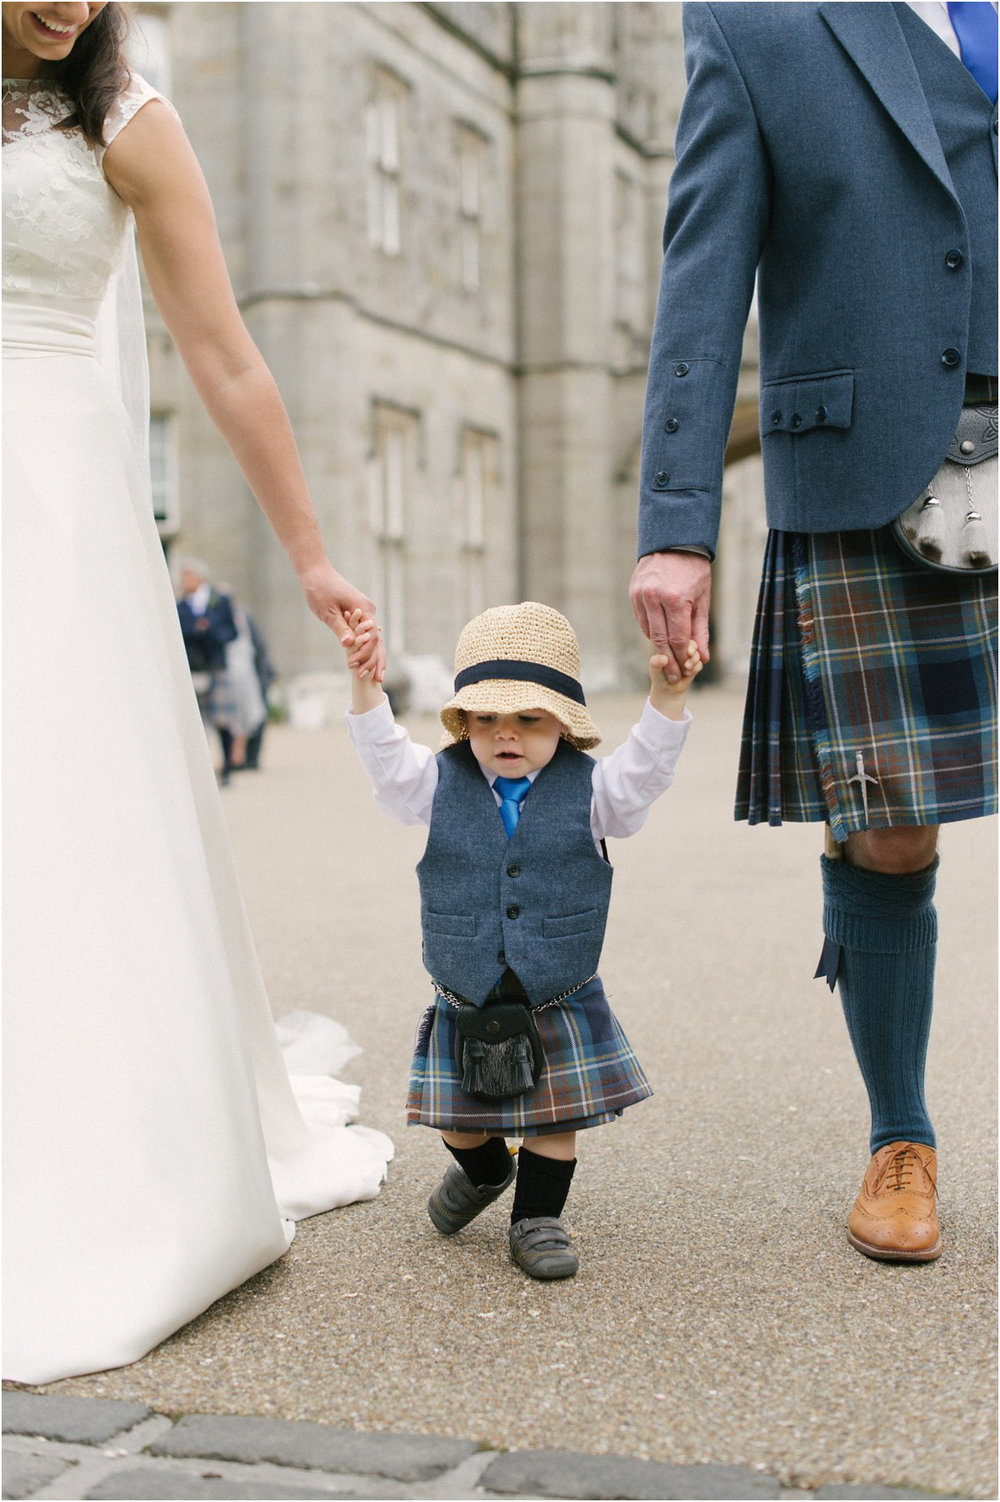  Newlyweds with their young child during their wedding in Blairquhan by Cro & Kow 